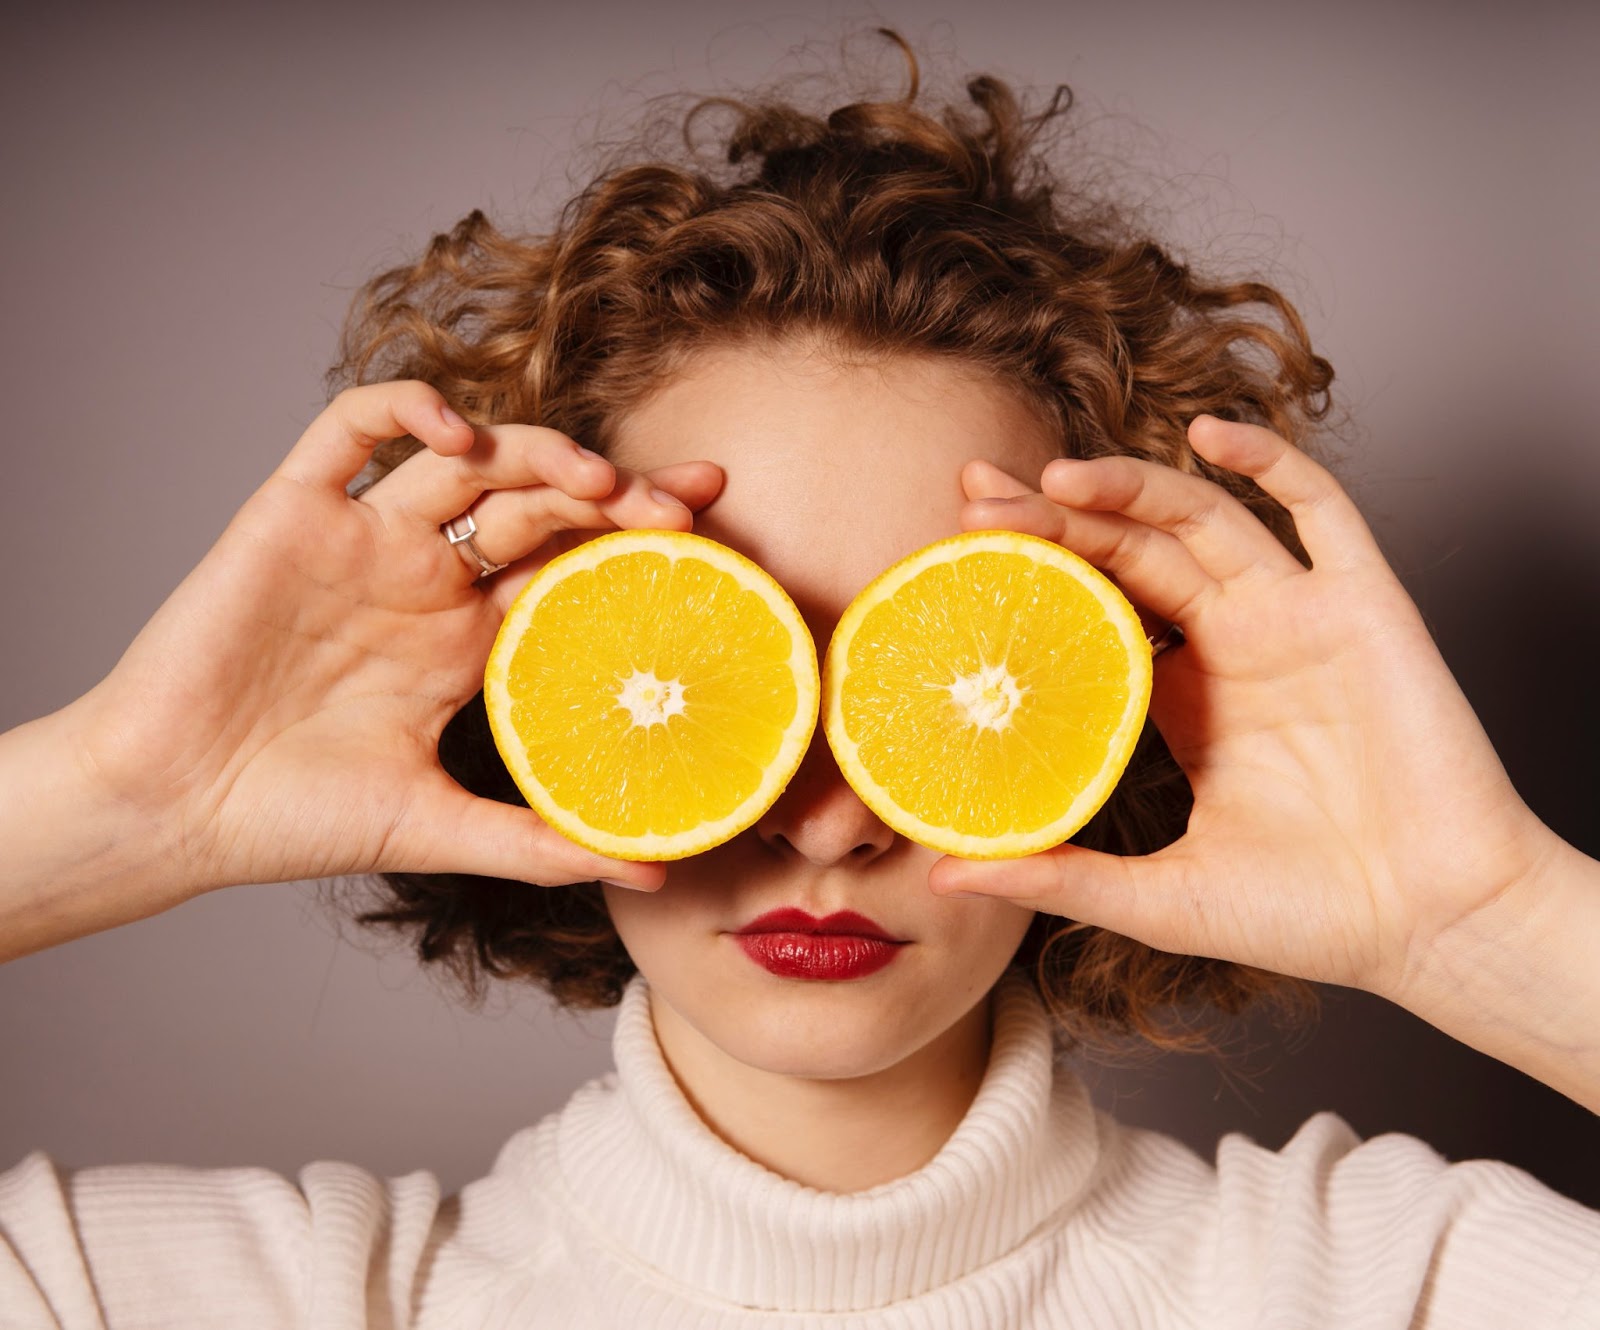 A picture of a woman holding to orange halves in front of her eyes.